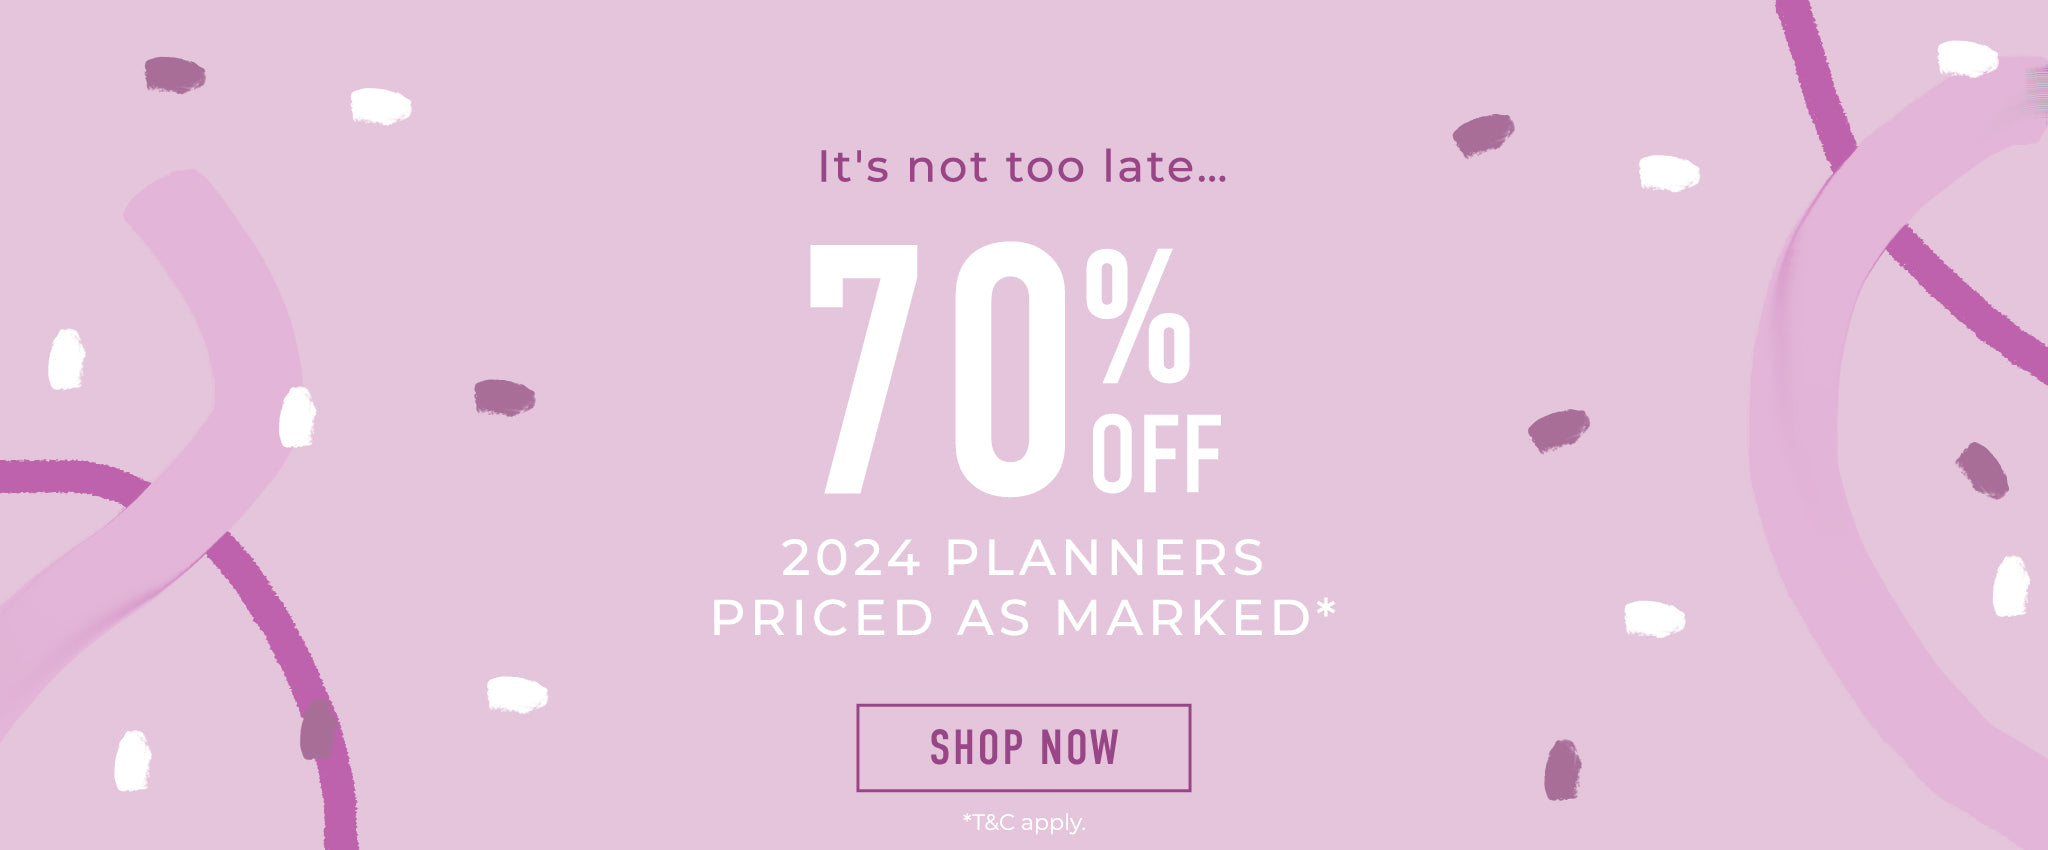 70& Off 2024 Planners - Prices as marked